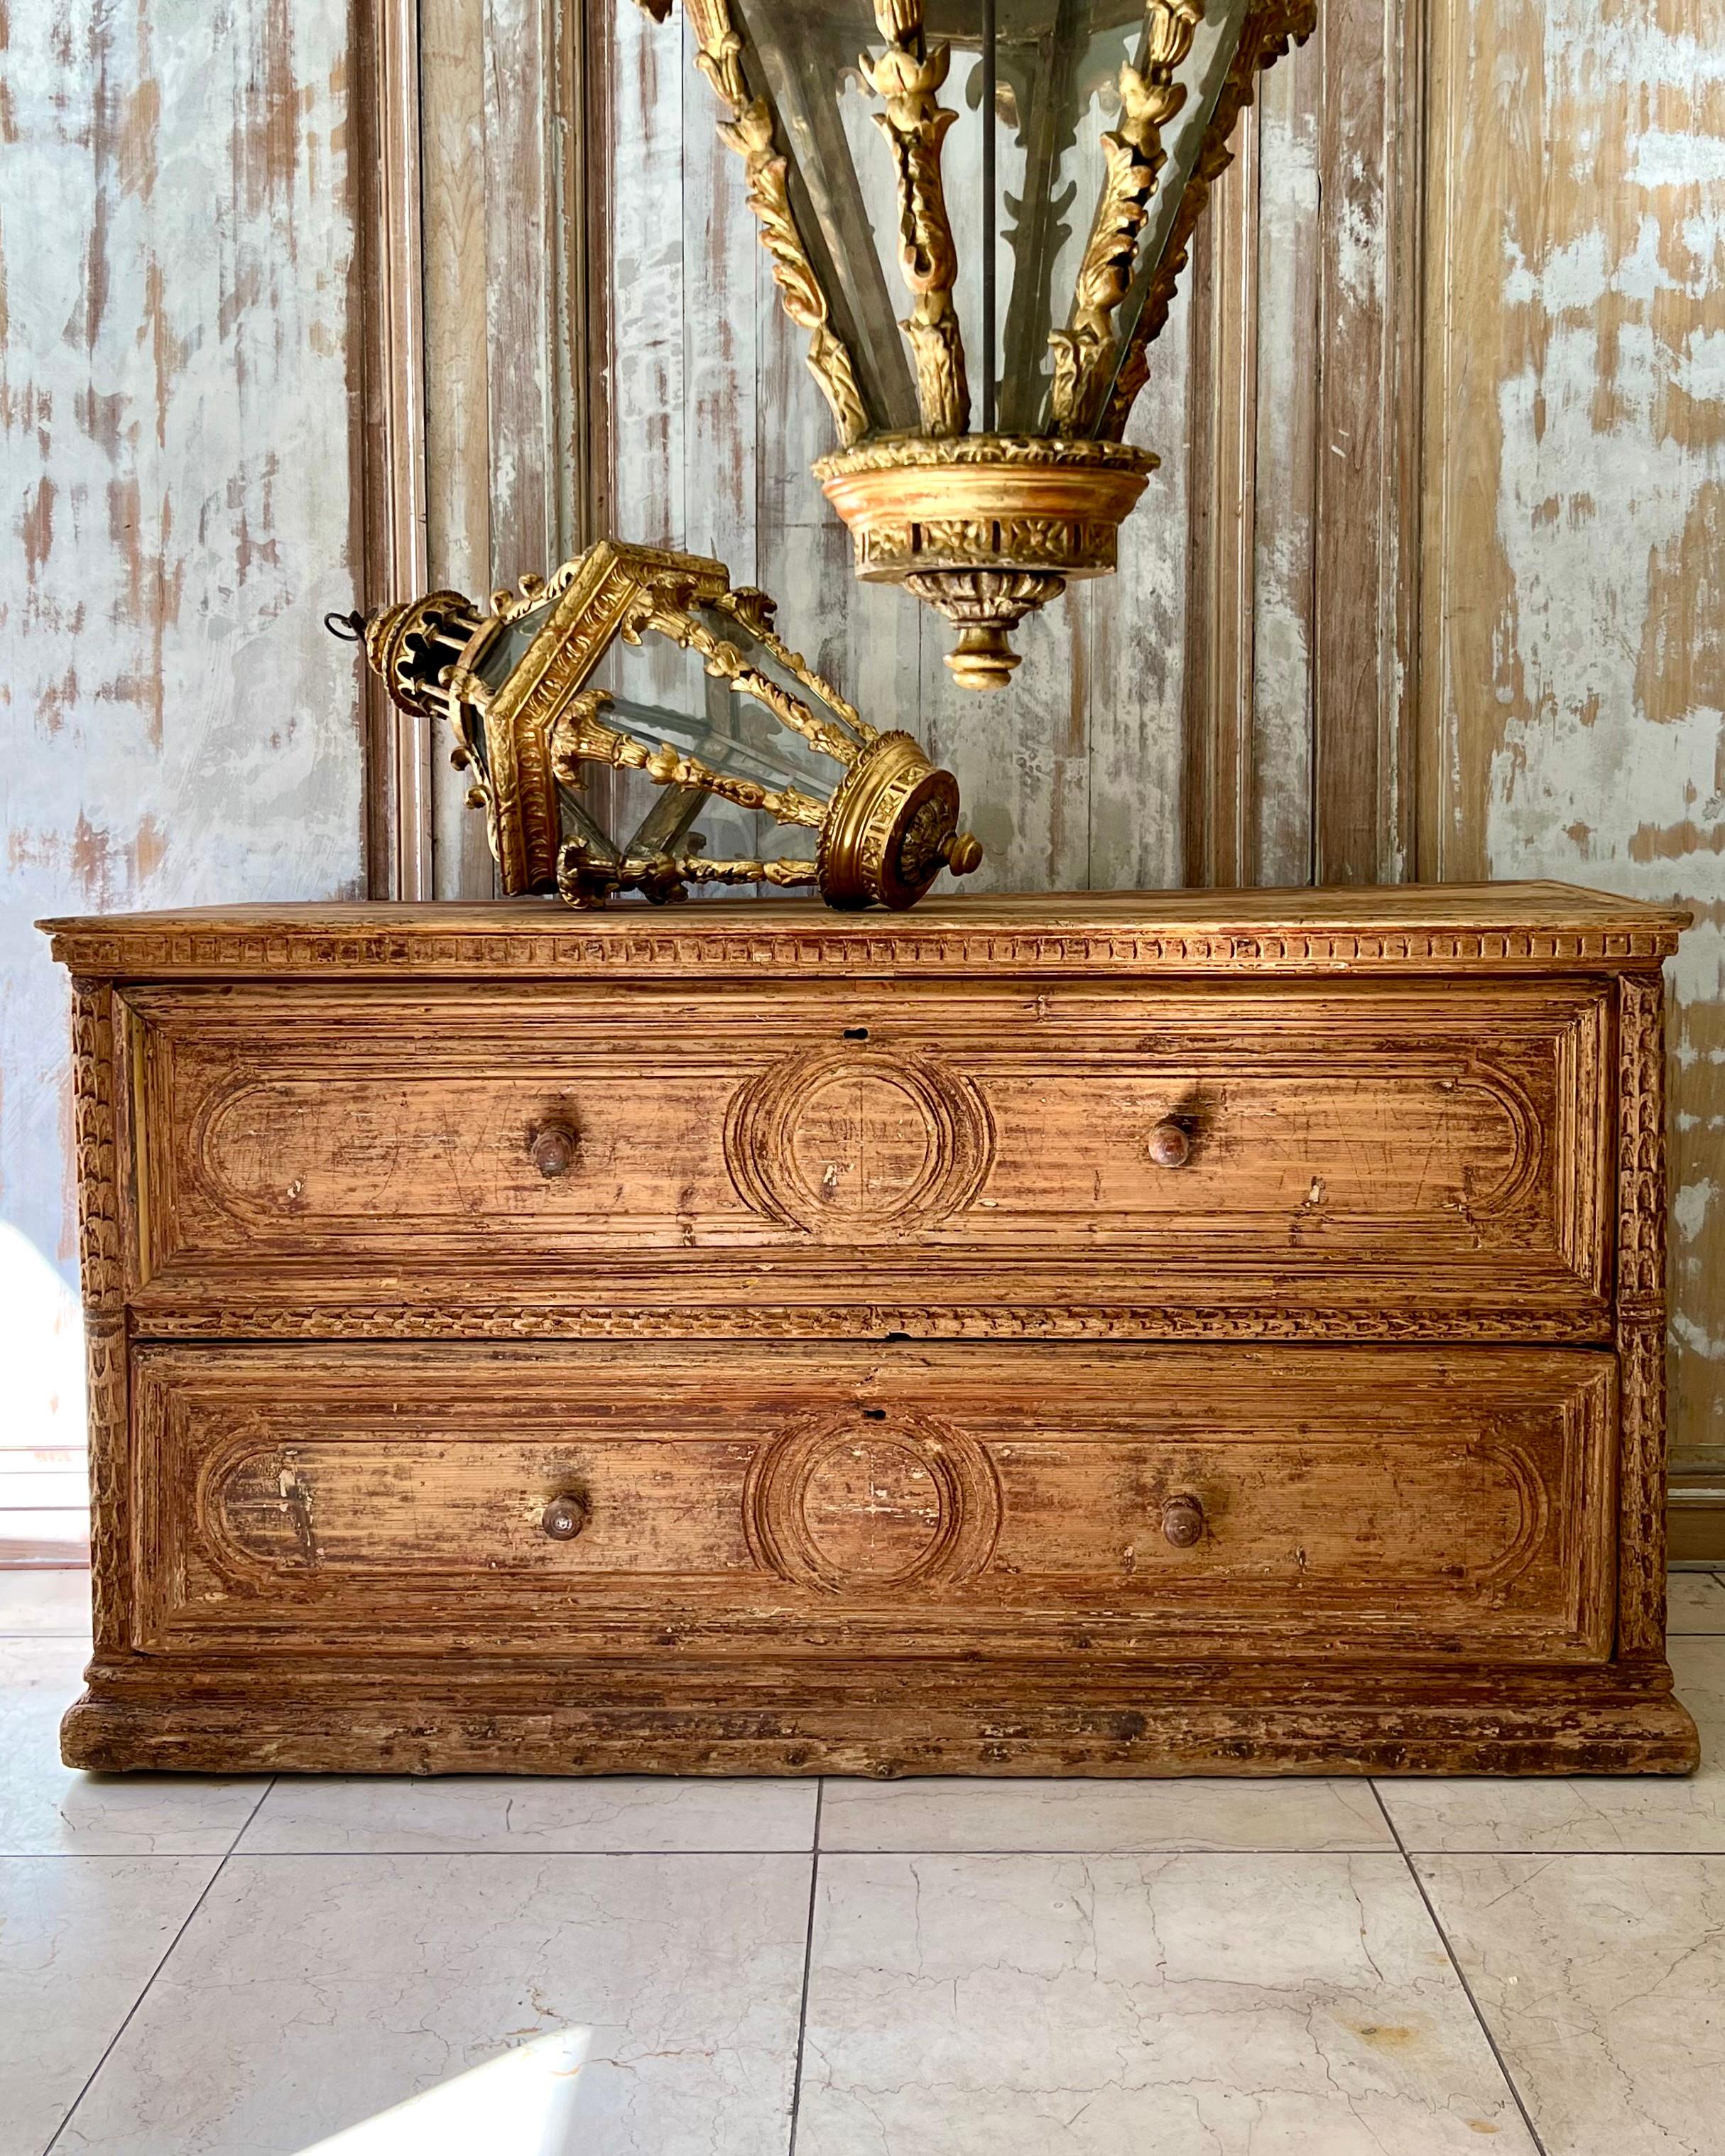 Large and very rare 18th century Italian Sacristy Commode in original, now patinated oak wood with two very deep carved front drawers - used in a sacristy to keep the liturgical clothes appropriately.
Italy 1700:s
